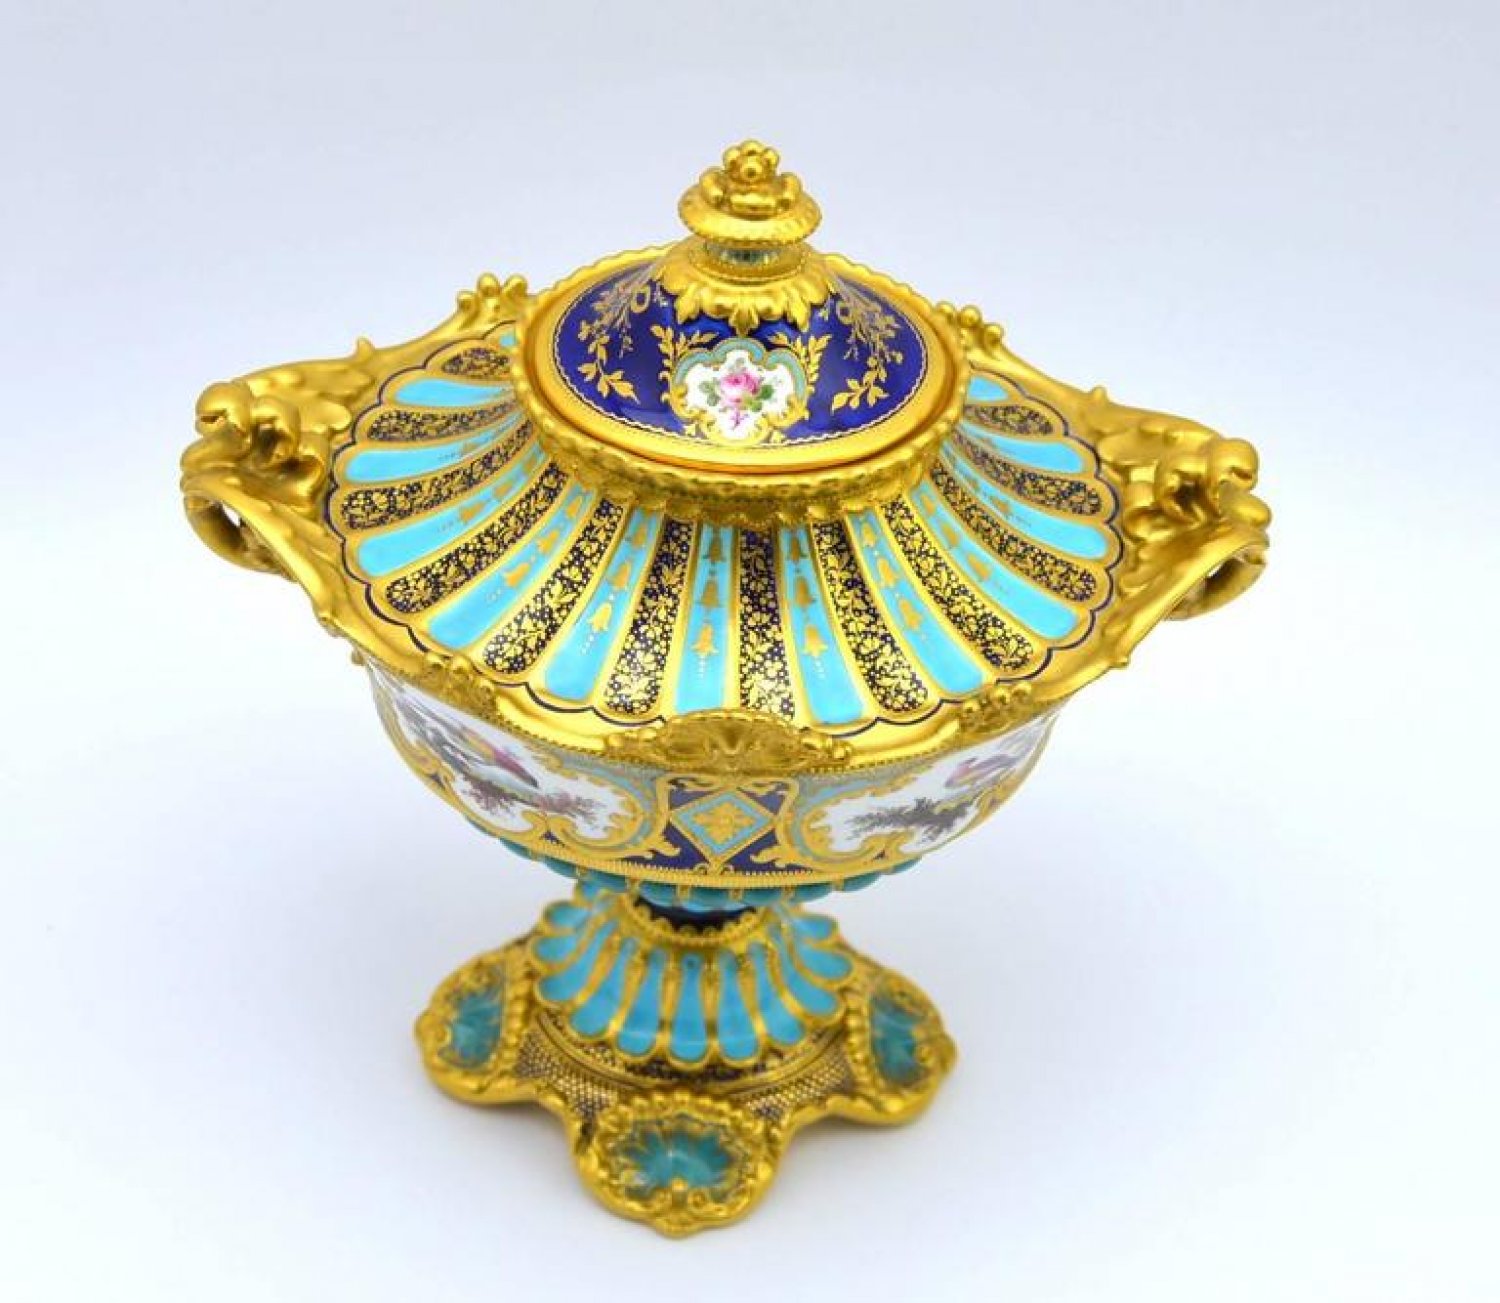 A fine and rare Royal Crown Derby vase, by Desire Leroy 1897